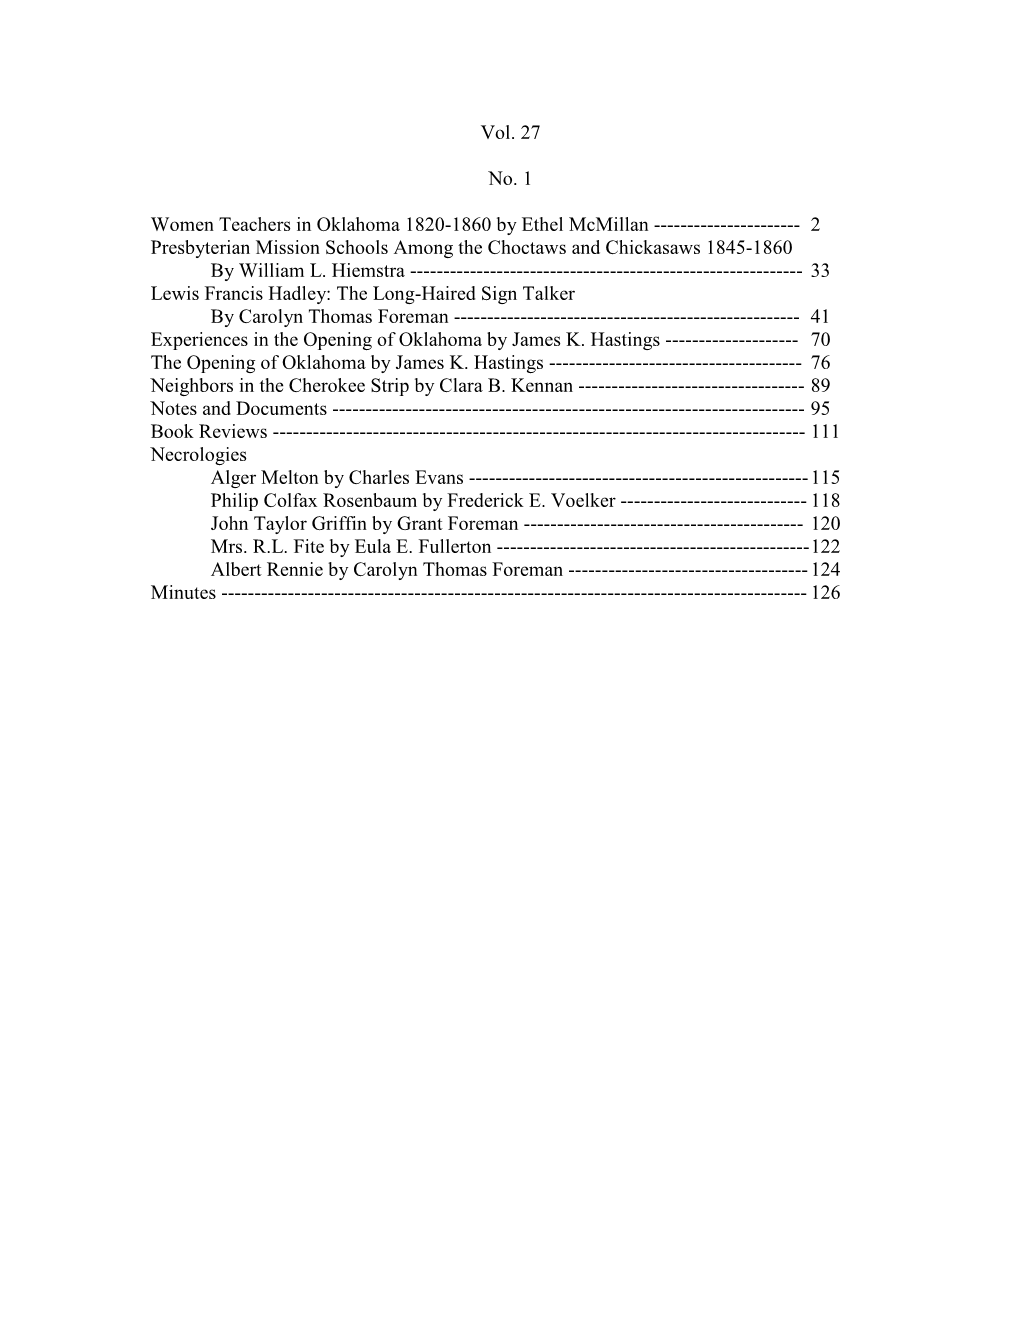 2 Presbyterian Mission Schools Among the Choctaws and Chickasaws 1845-1860 by William L